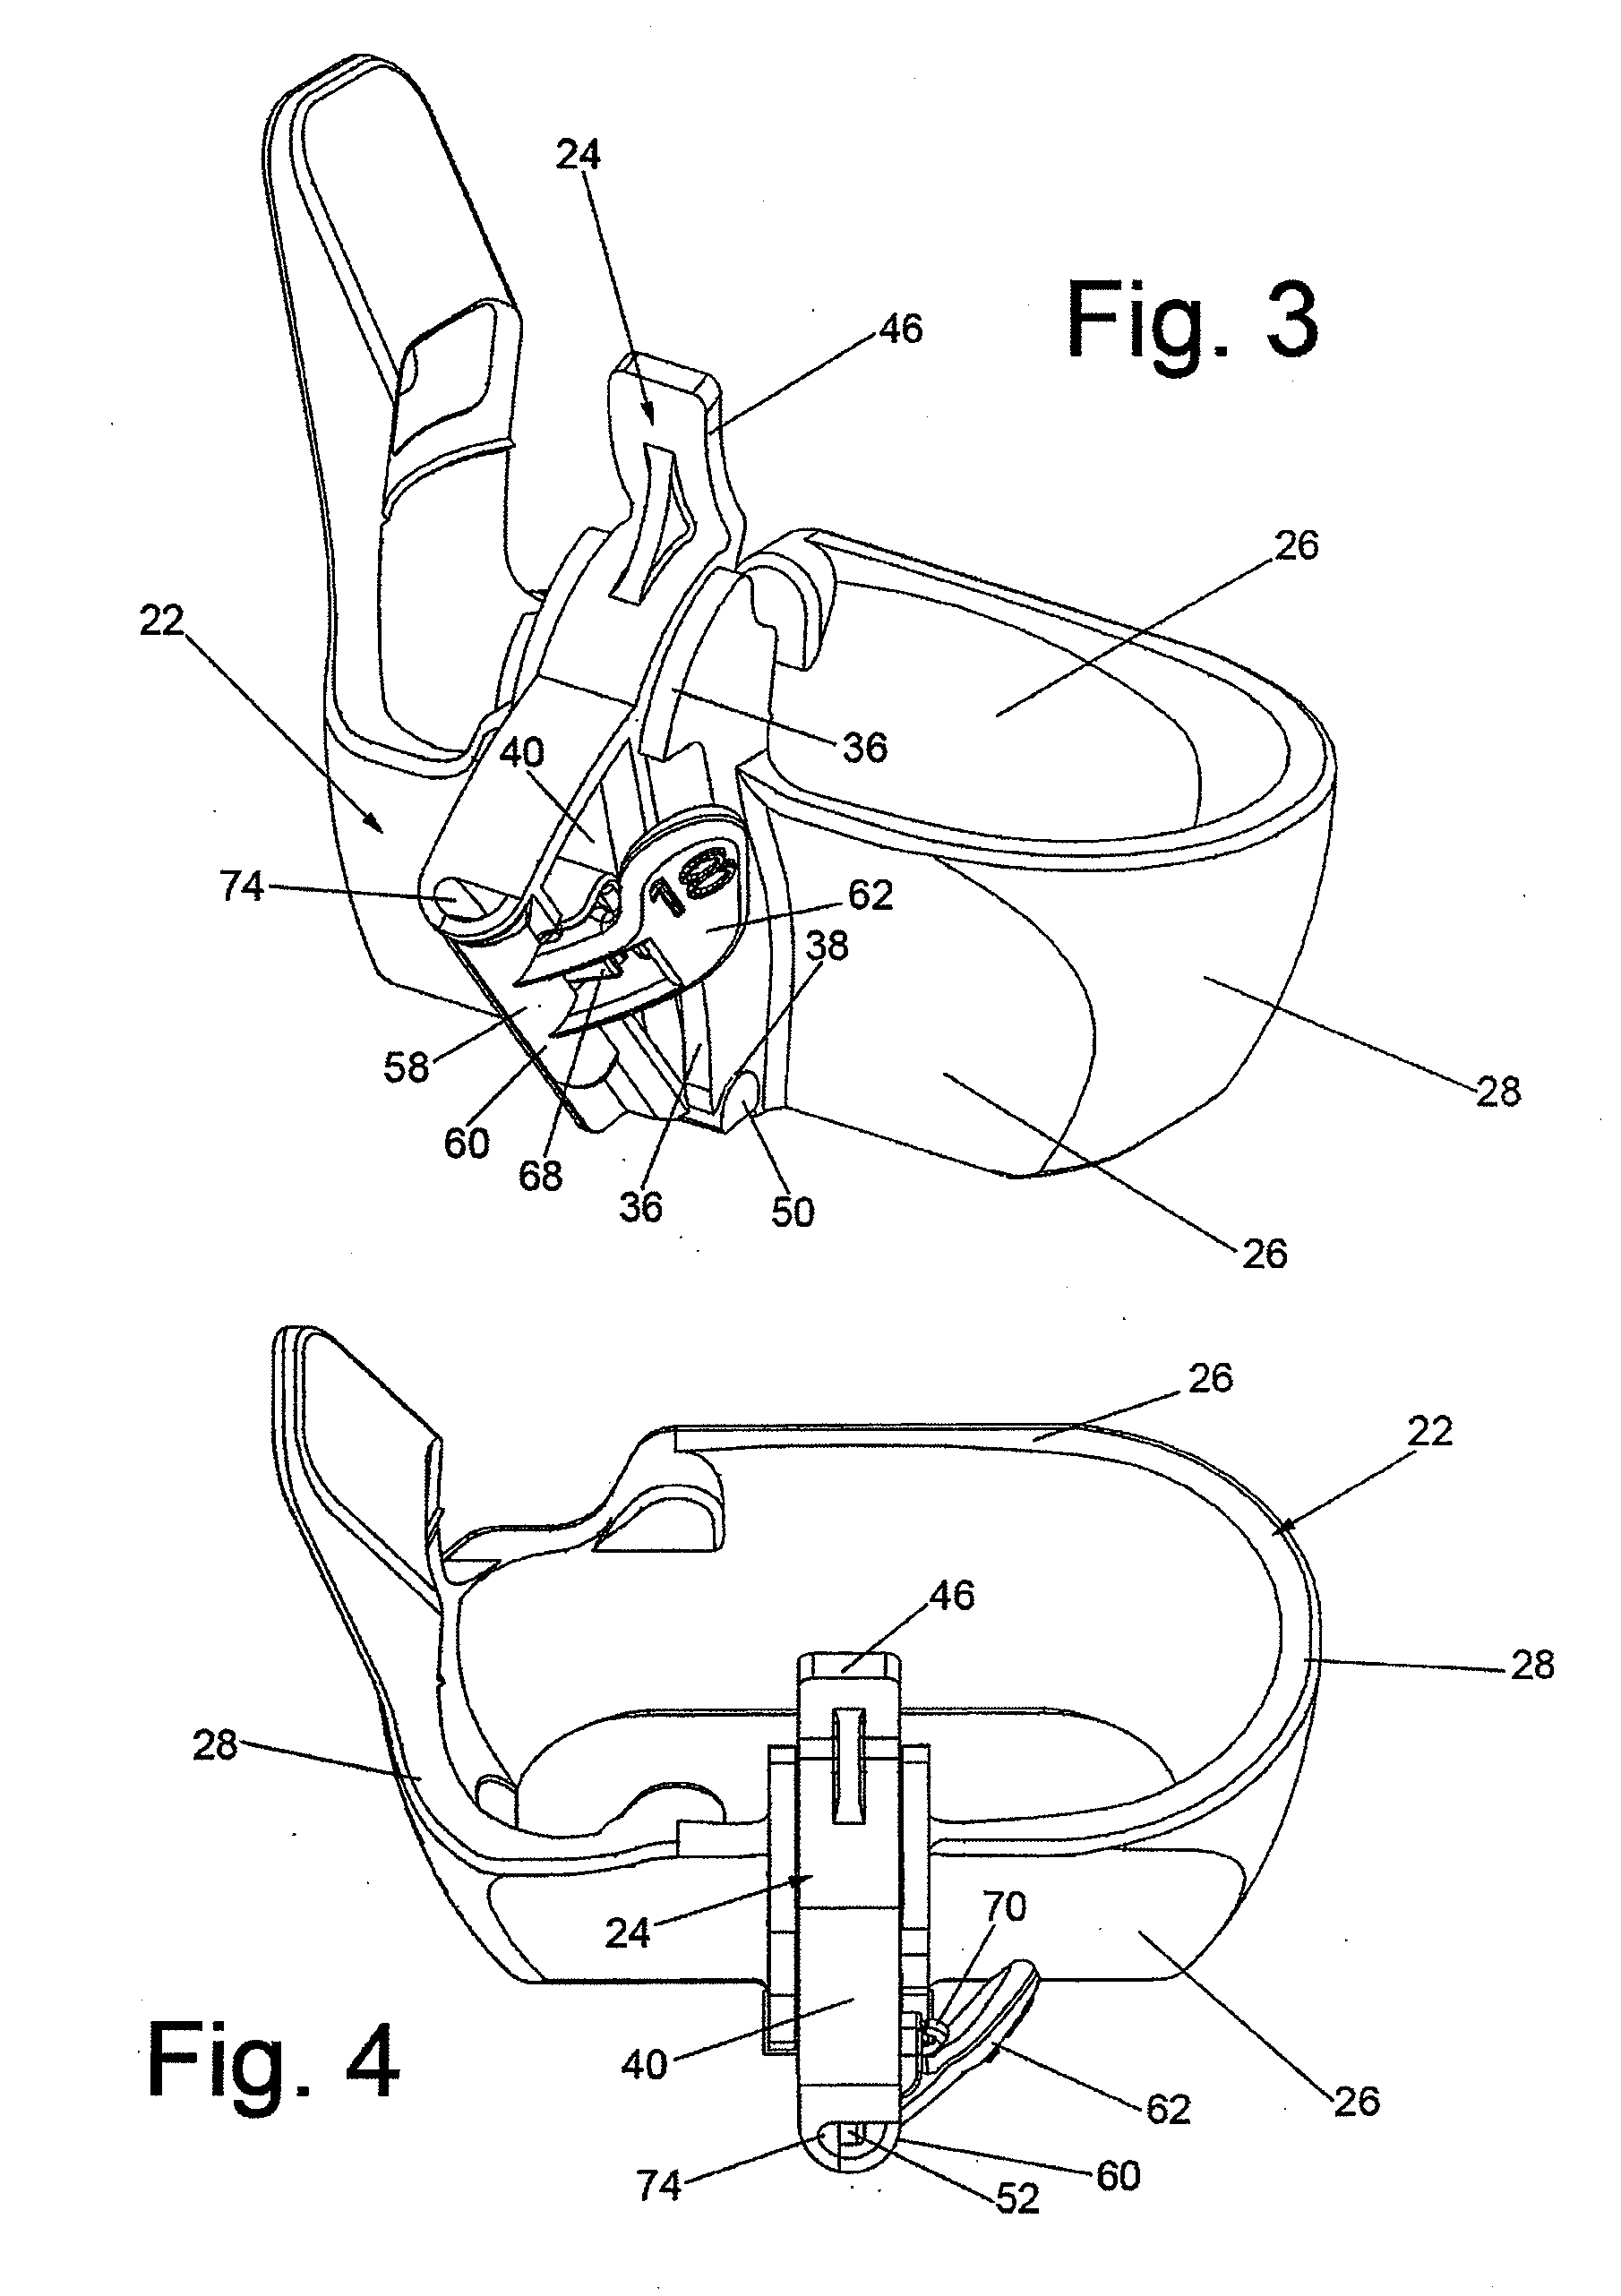 Needle guide system for use with ultrasound transducers to effect shallow path needle entry and method of use